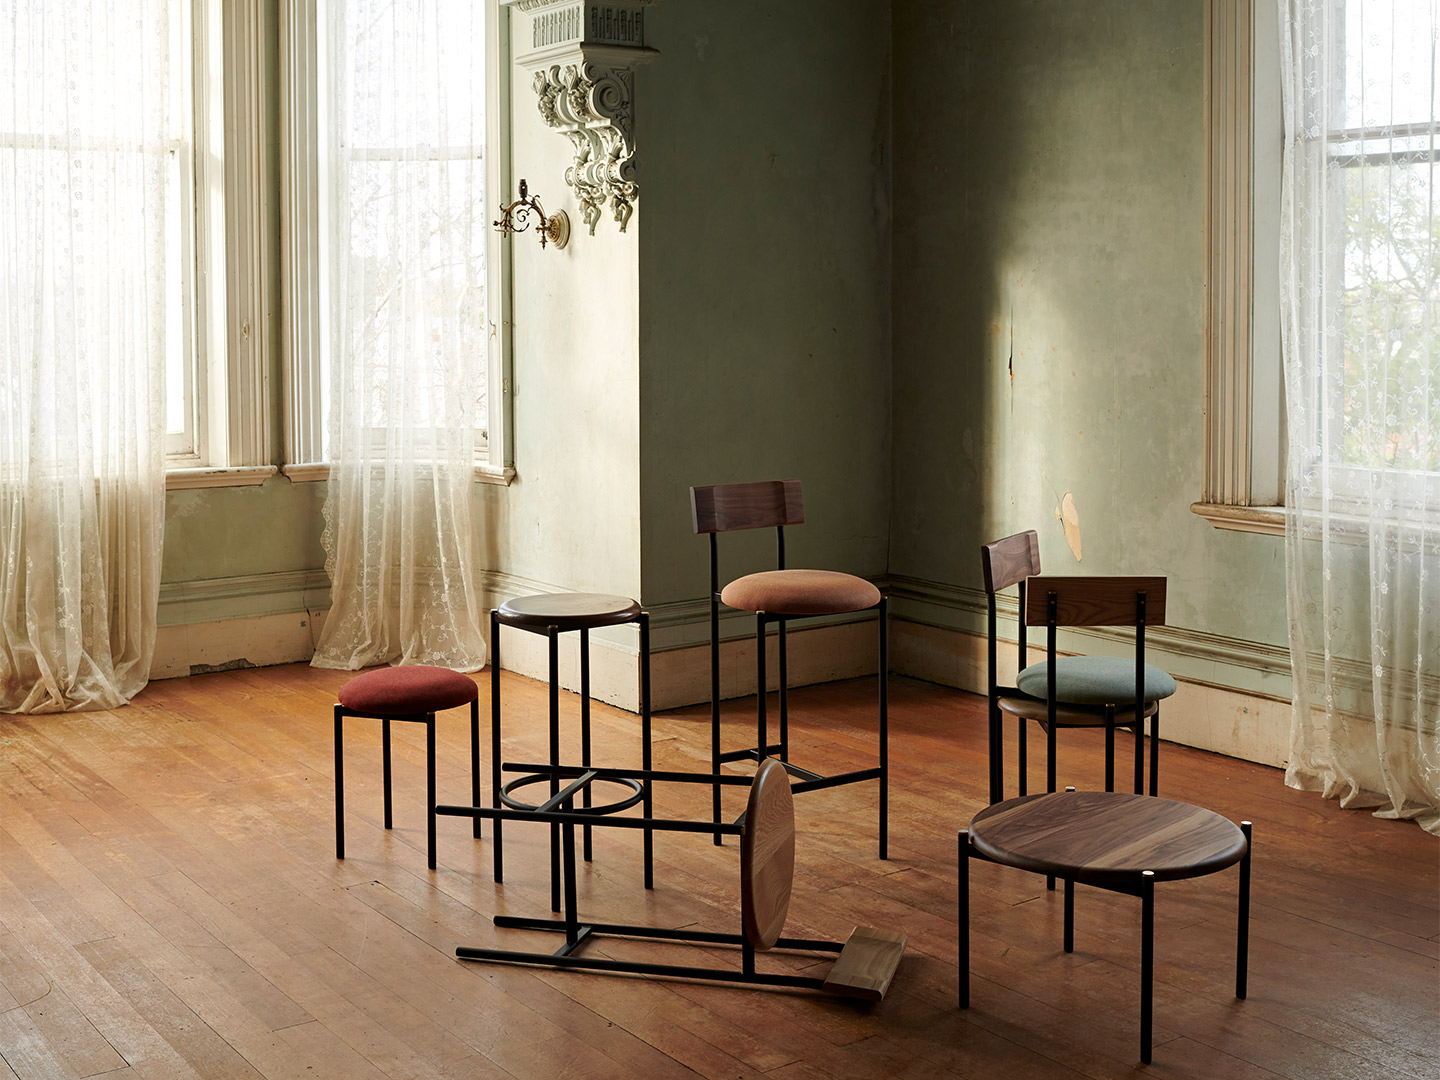 Volta furniture collection by Dowel Jones and RIES